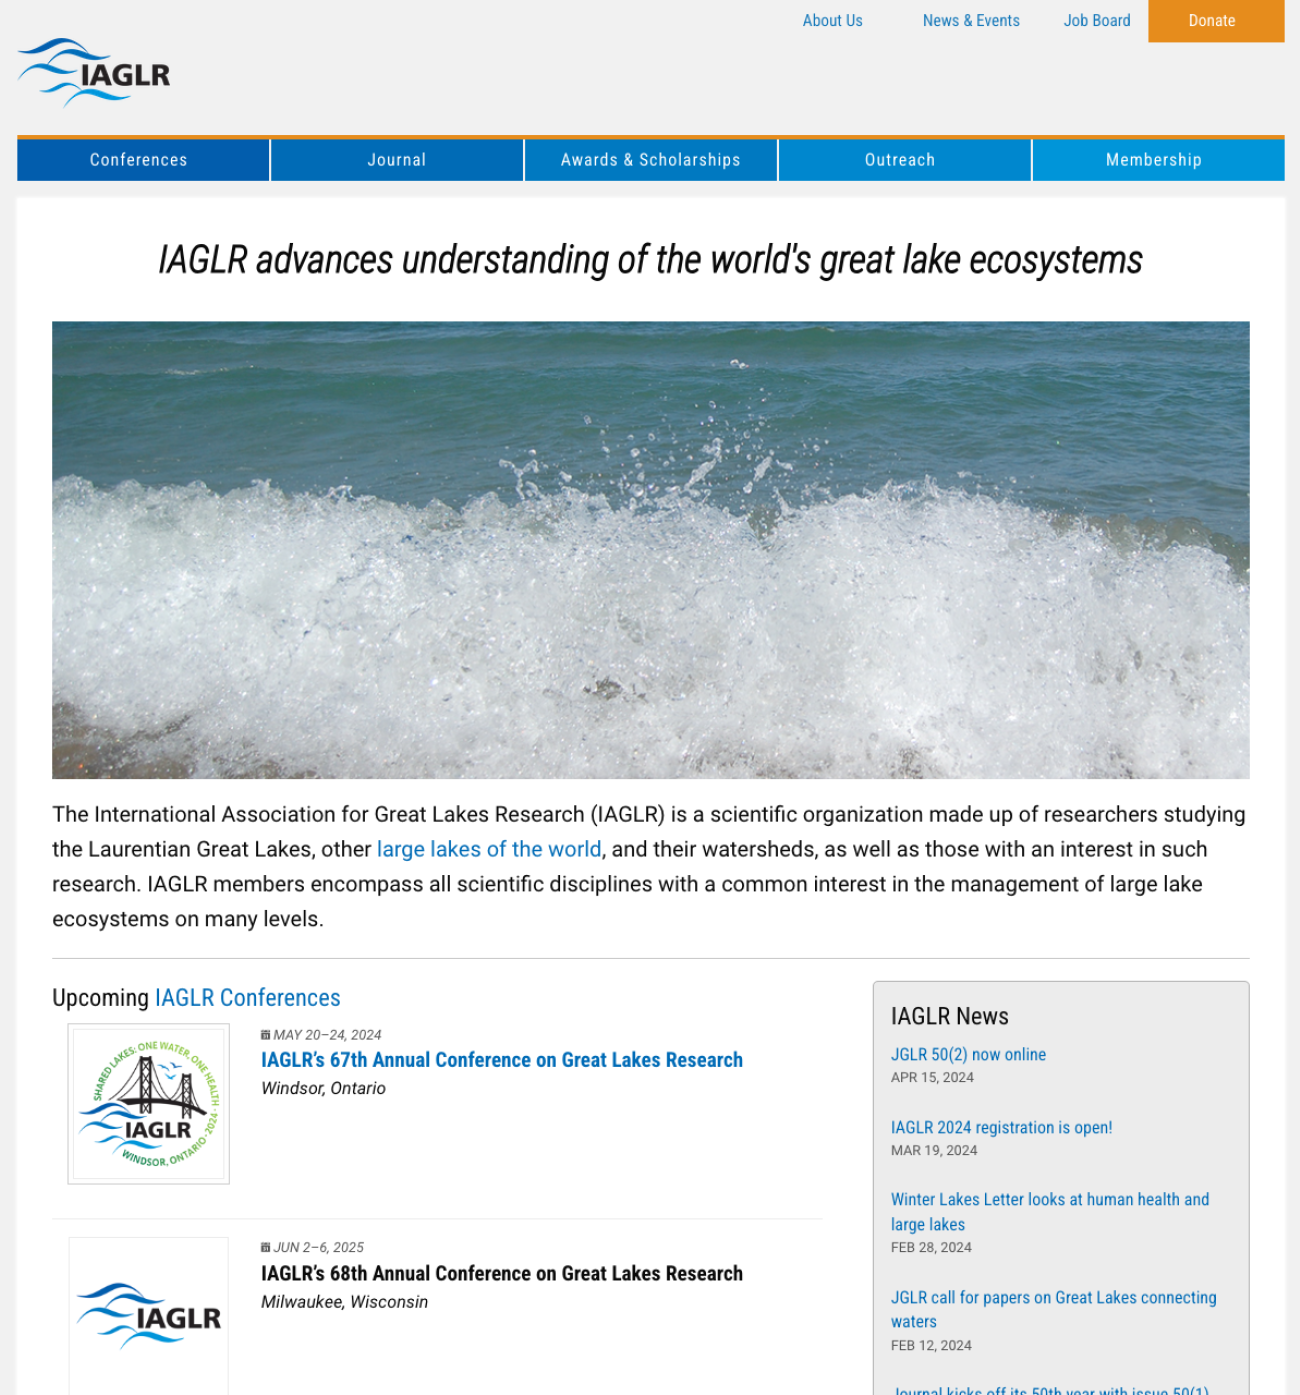 Screenshot of the IAGLR home page